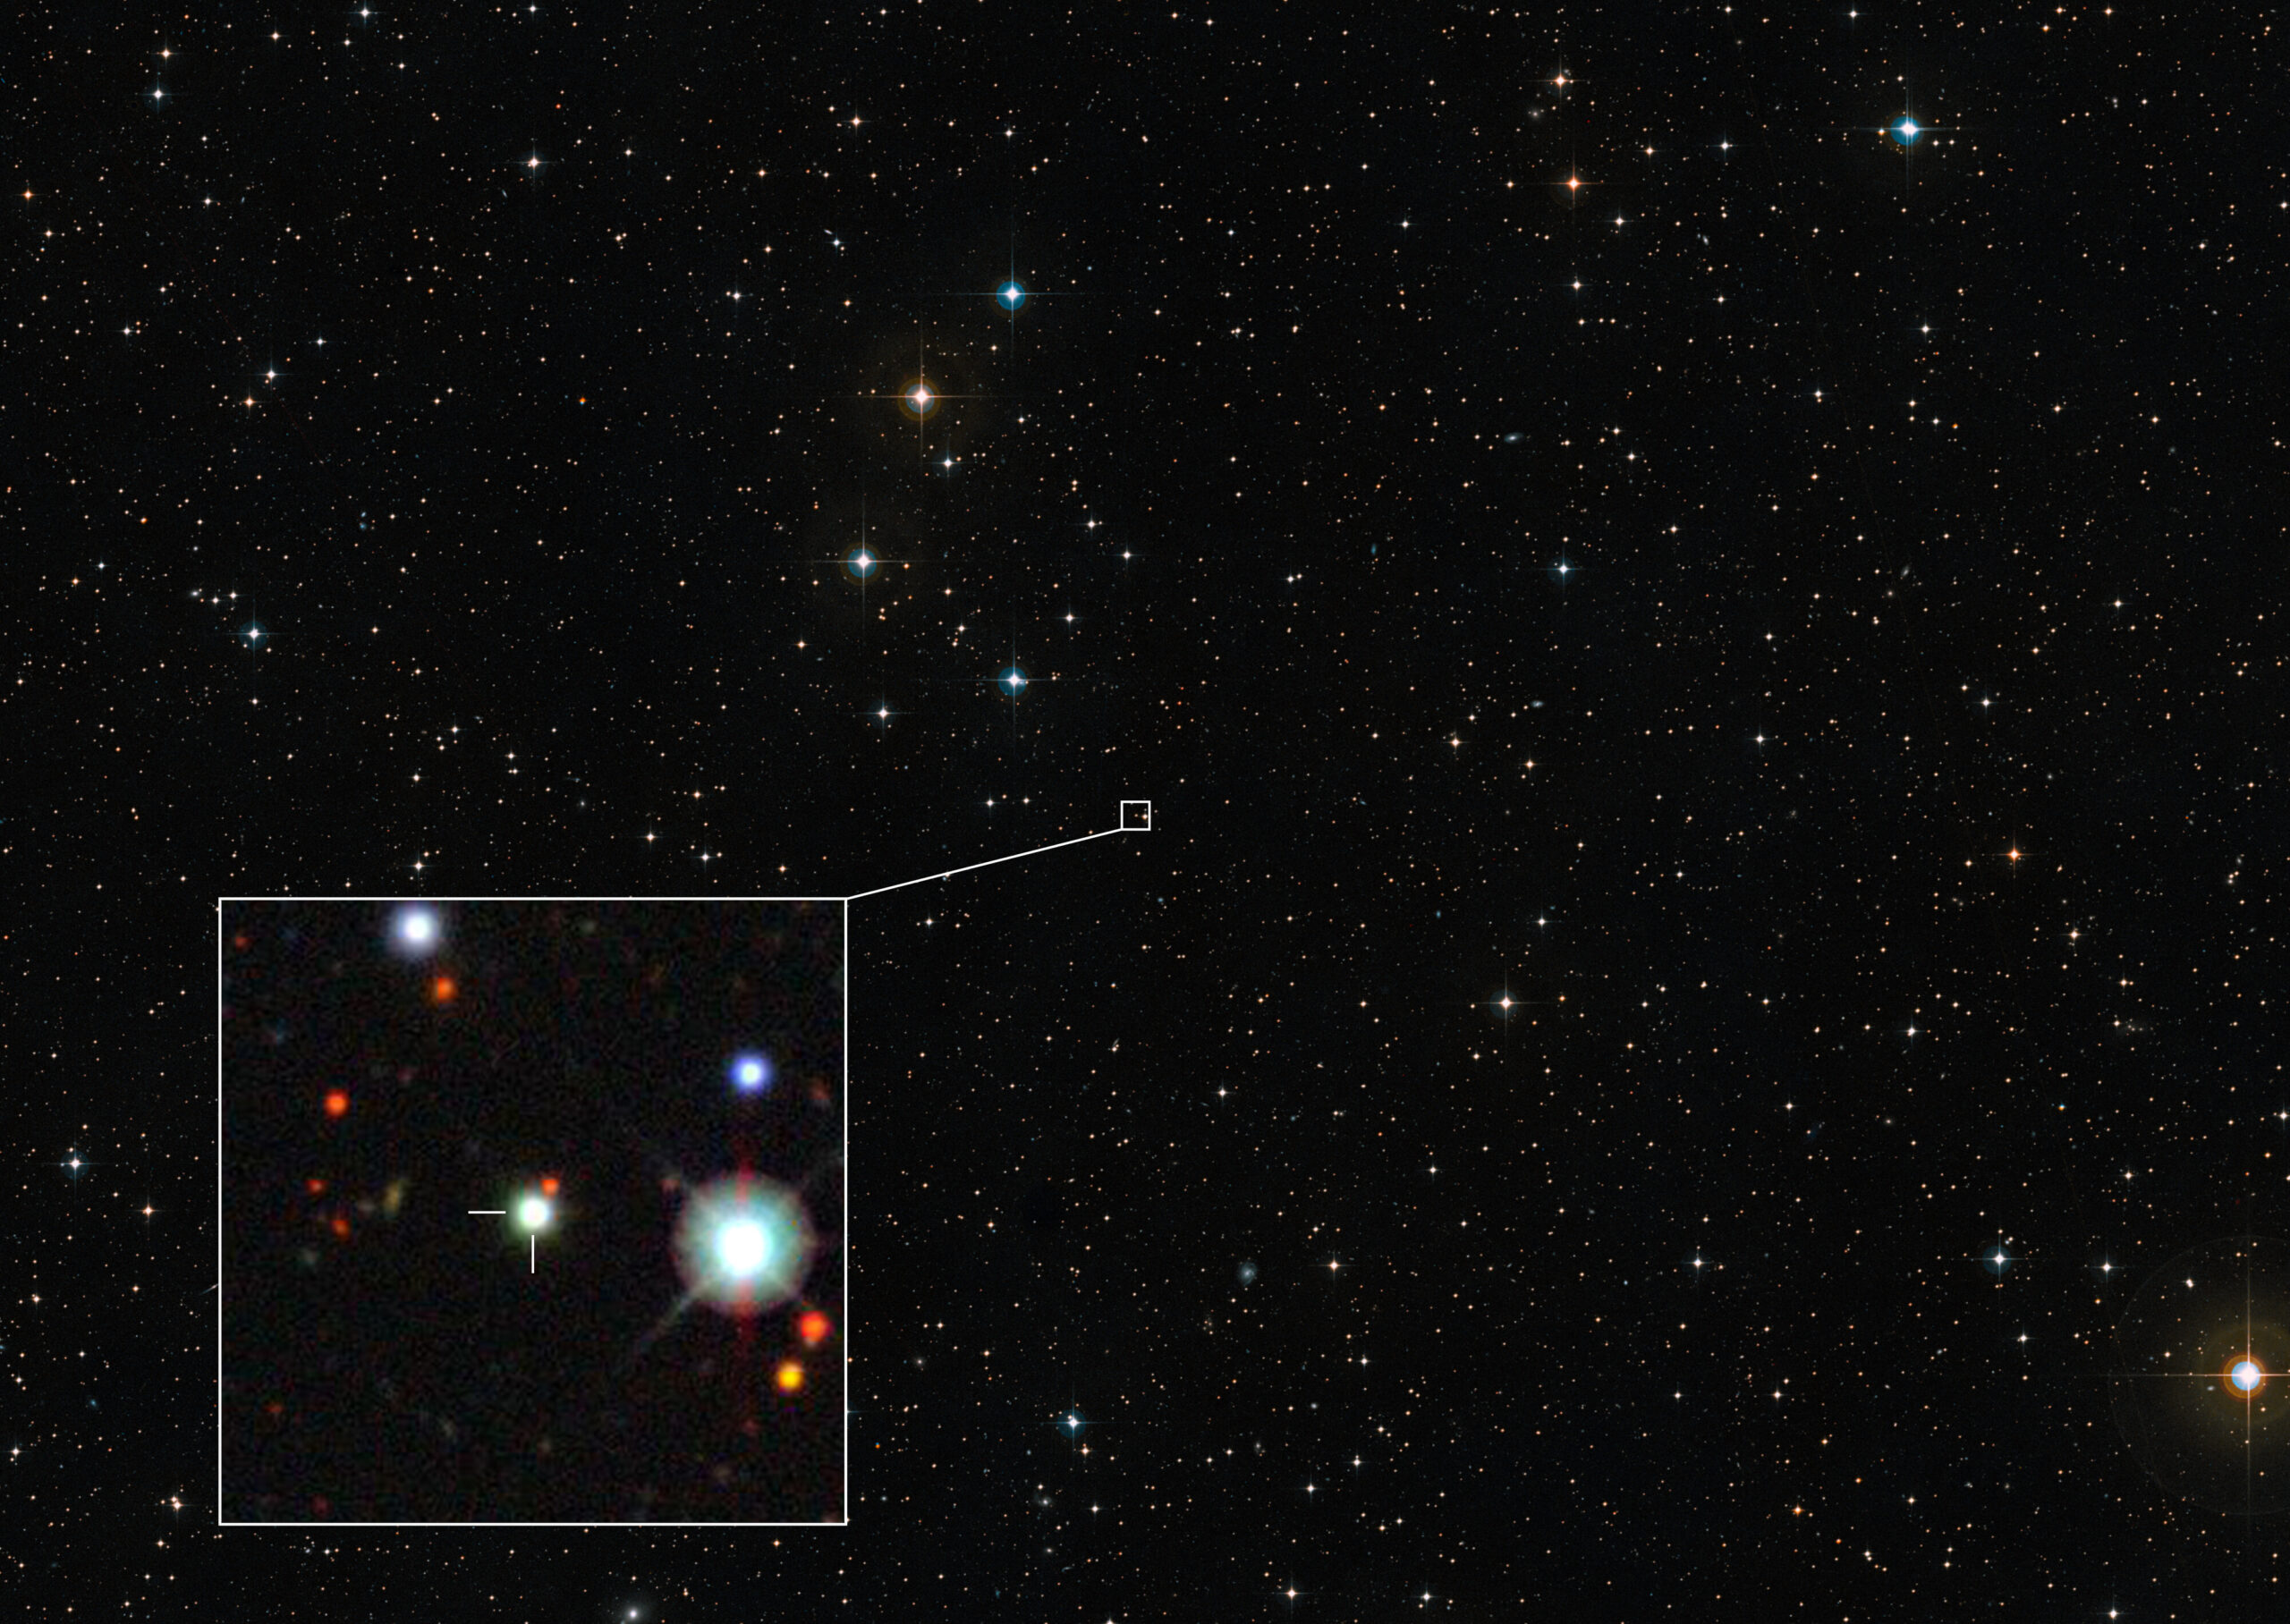 This image shows the region of the sky in which the record-breaking quasar J0529-4351 is situated. This picture was created from images forming part of the Digitized Sky Survey 2, while the inset shows the location of the quasar in an image from the Dark Energy Survey. CREDIT: ESO/Digitized Sky Survey 2/Dark Energy Survey.